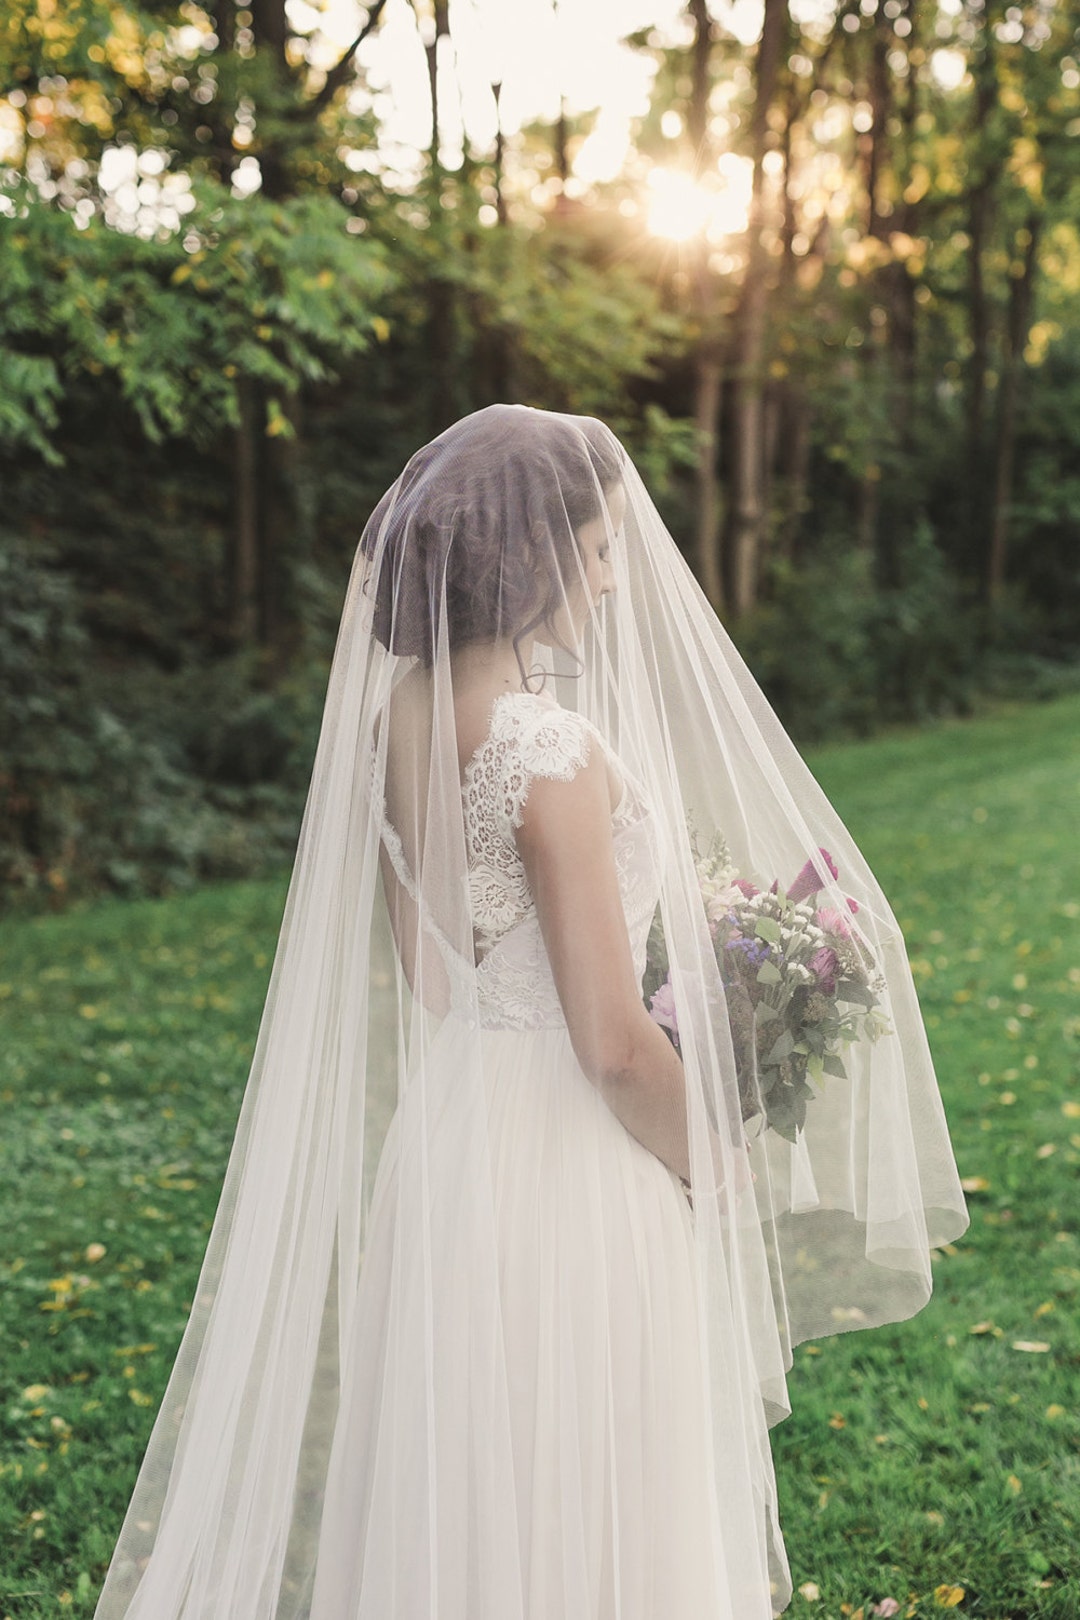 Ombre Champagne Floral Lace Ivory Cathedral Veil with Blusher Bridal V –  SheerGirl